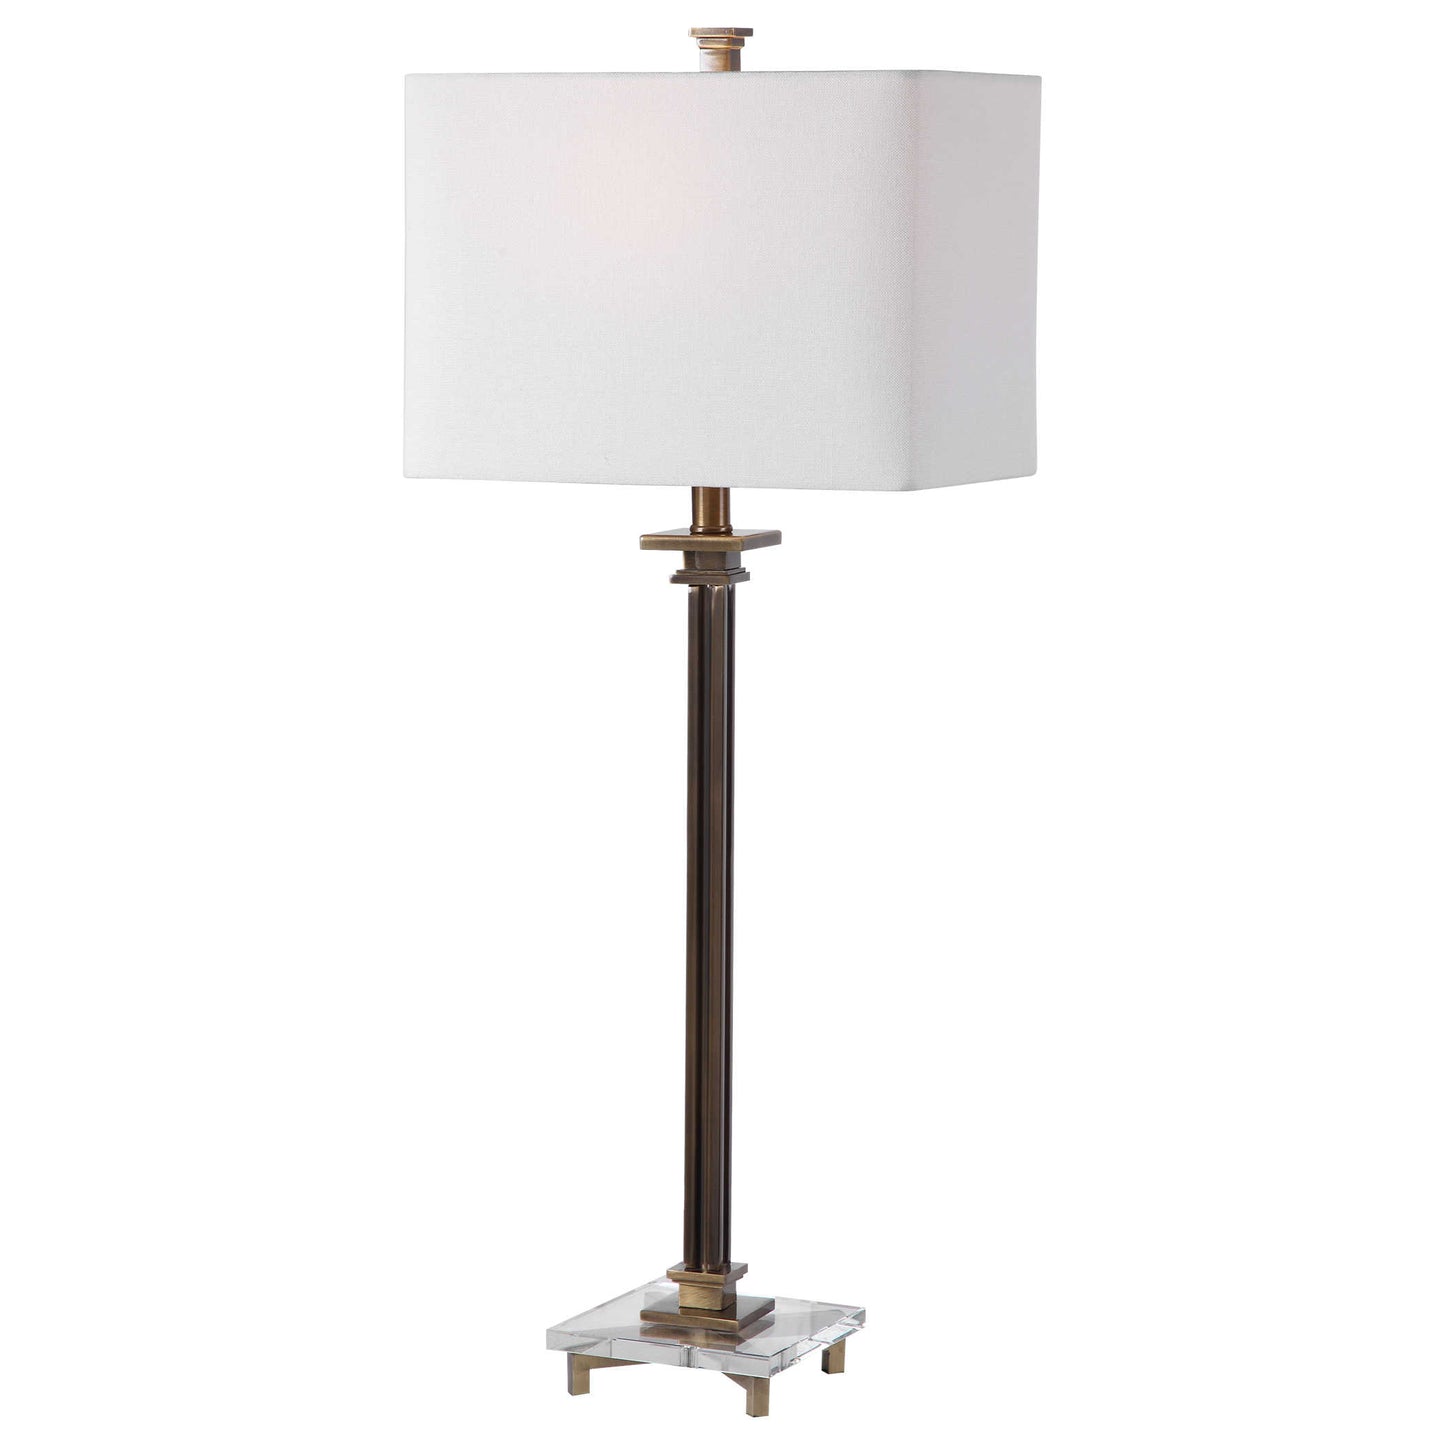 PHILLIPS TABLE LAMP